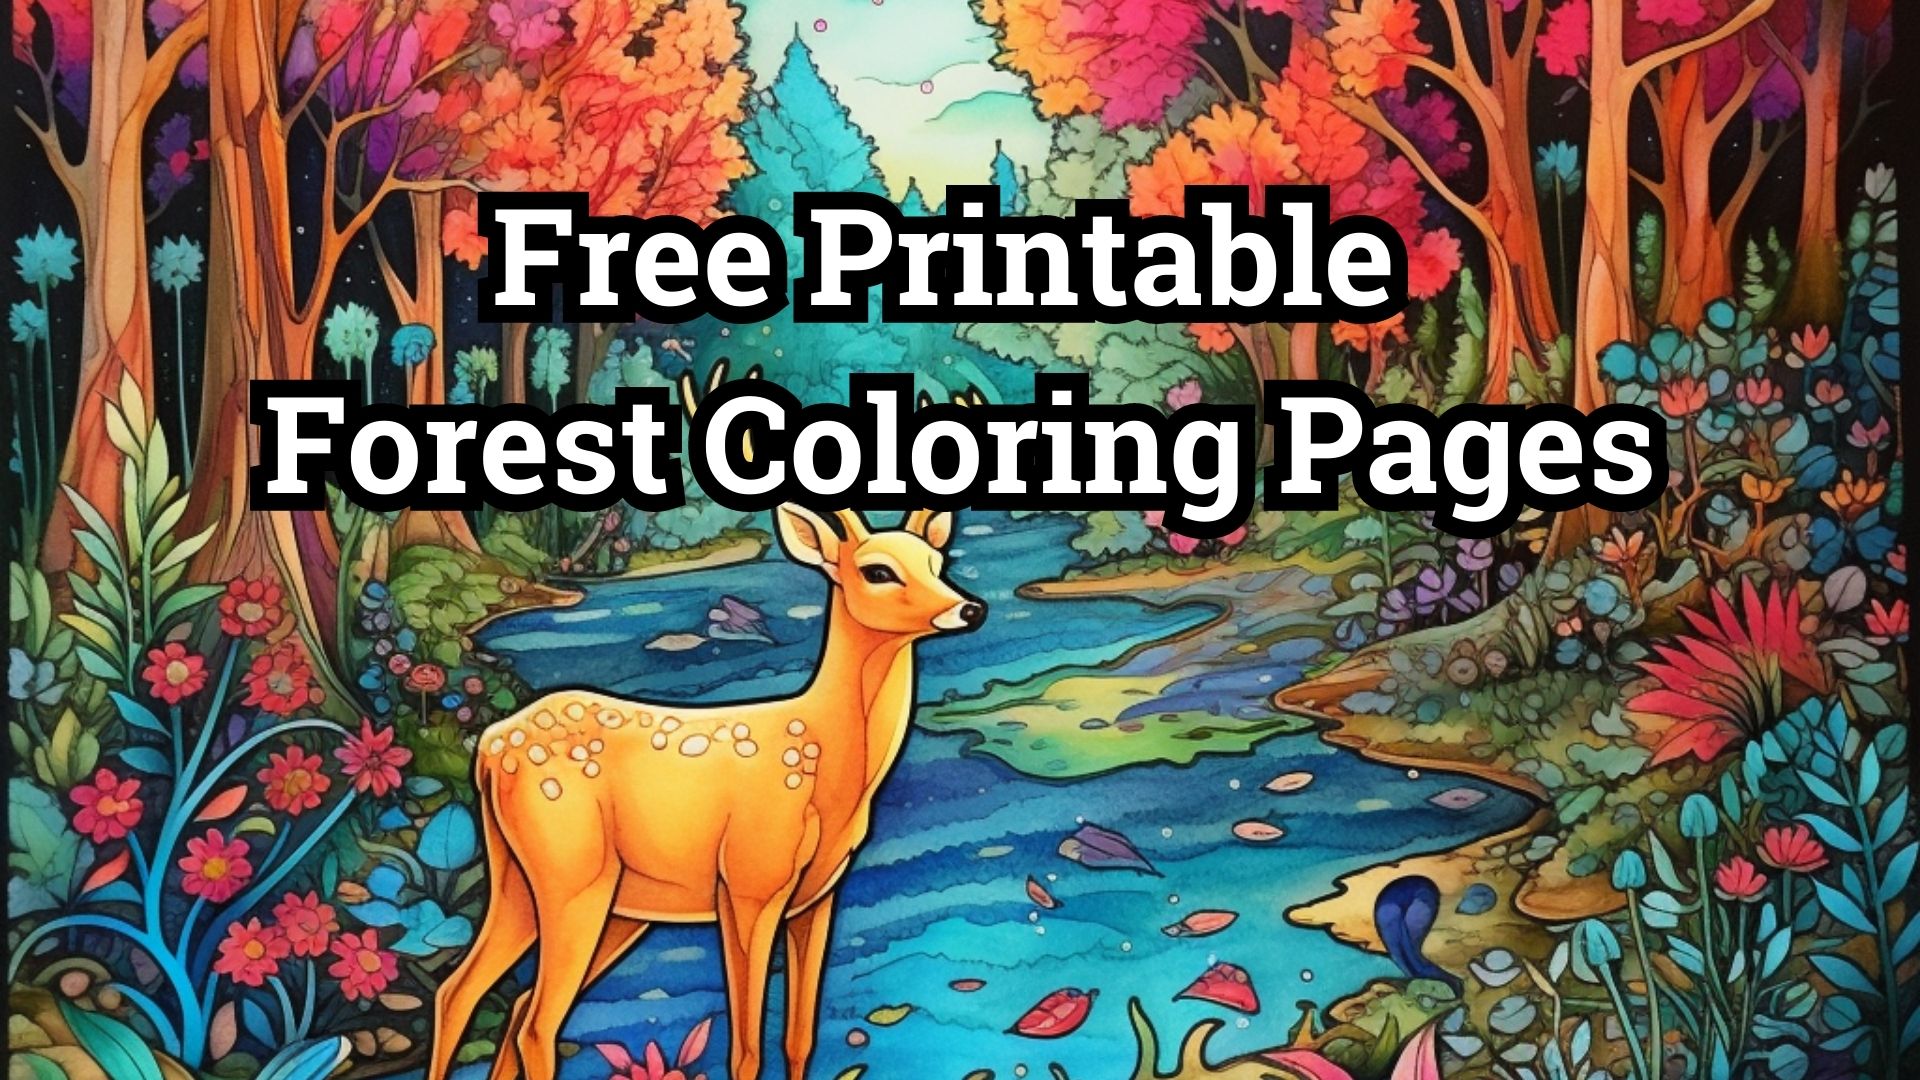 Free Printable Forest Coloring Pages List